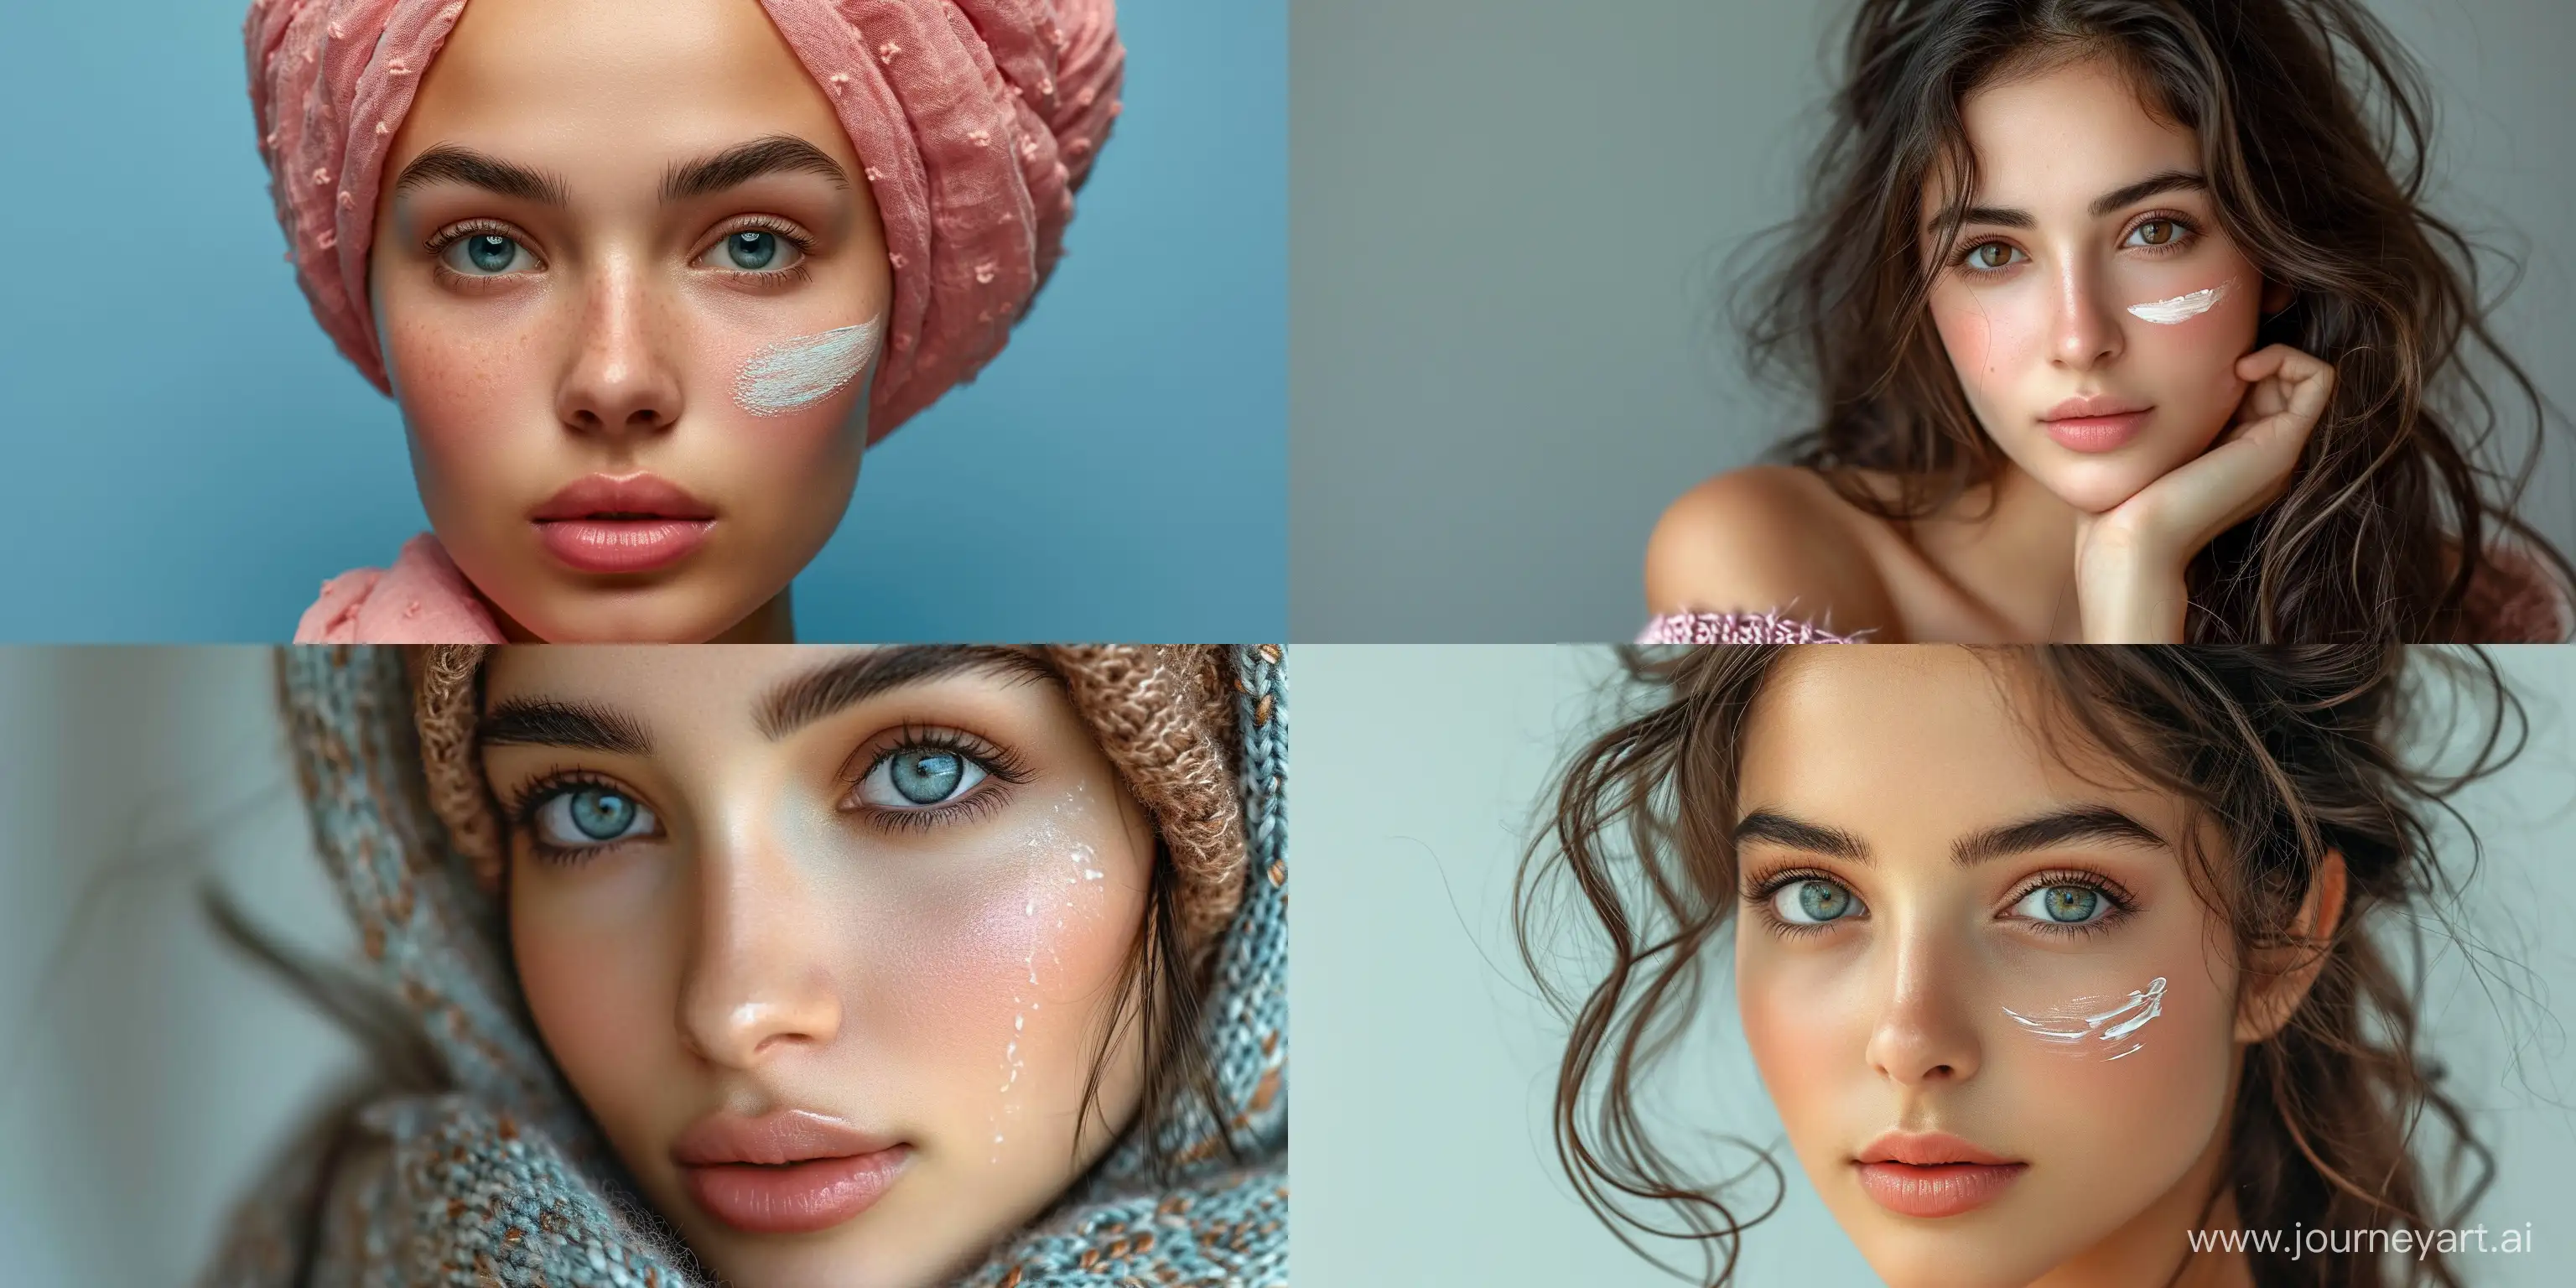 Fashion-Model-with-Delicate-Makeup-and-Face-Cream-in-HyperRealistic-Style